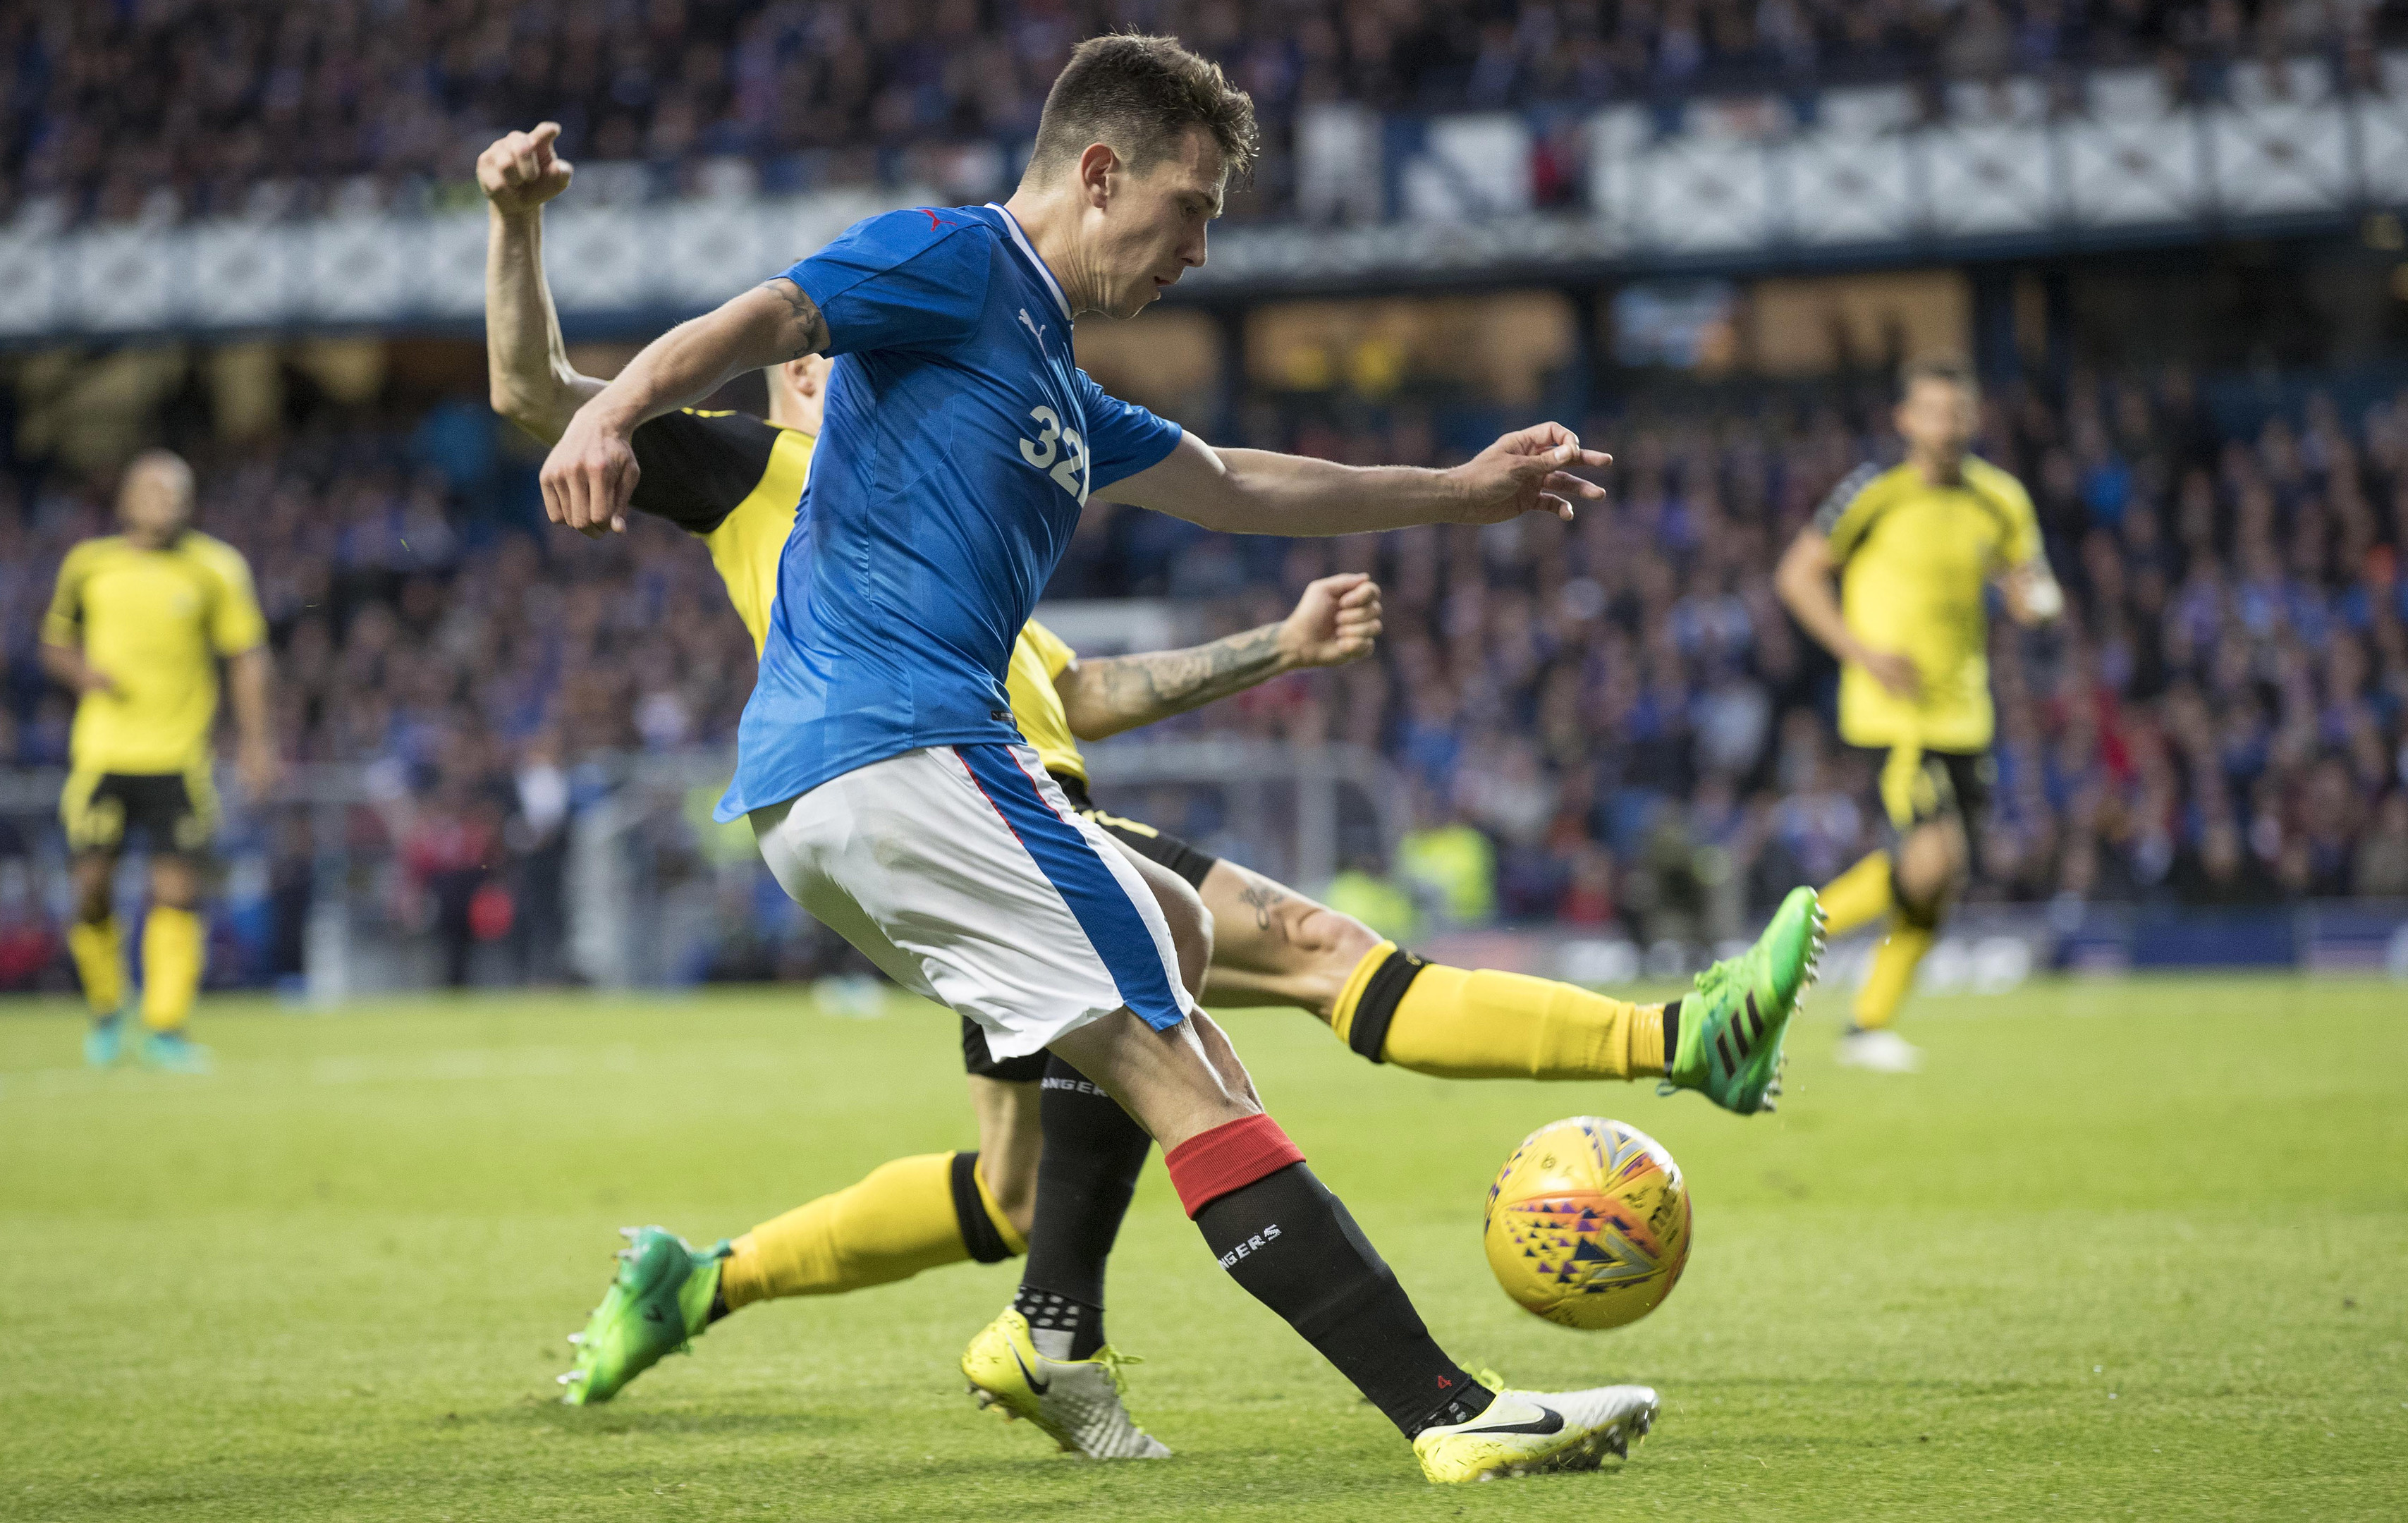 Ryan Jack in action for Rangers during the match against Progres Niederkorn at Ibrox (Steve Welsh/Getty Images)